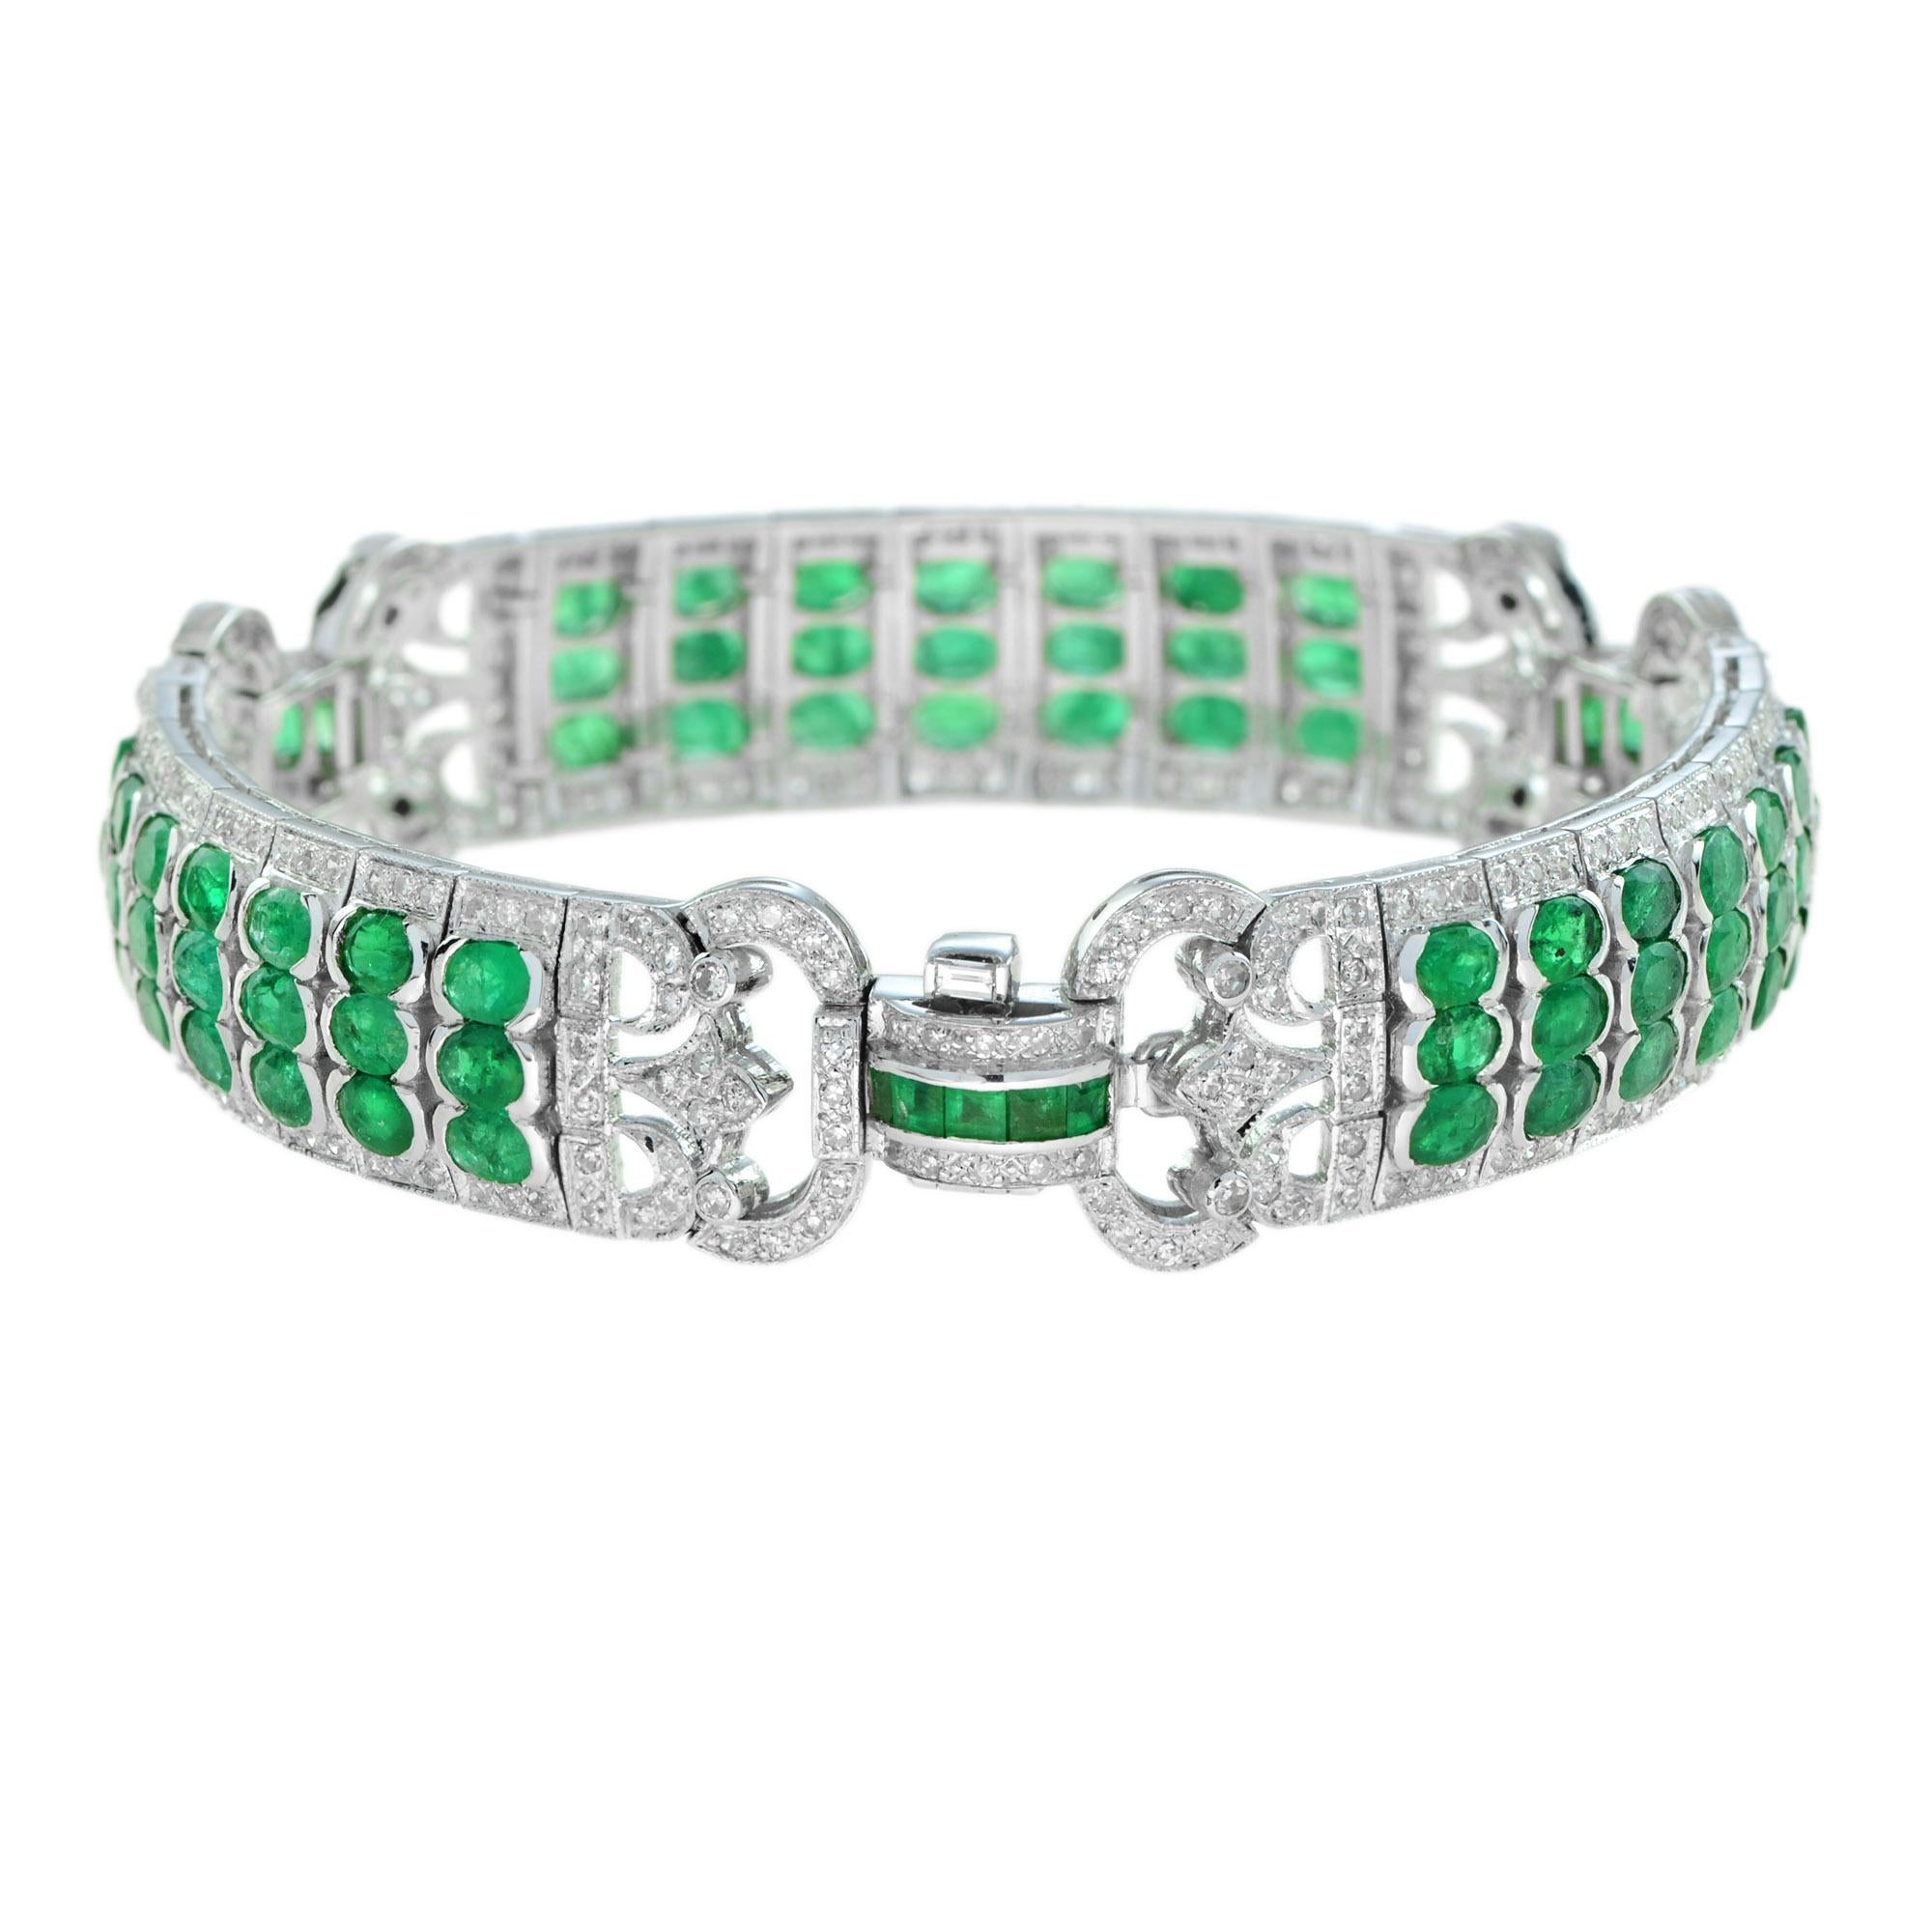 Oval Cut Art Deco Style 12.89 Ct. Emerald and Diamond Link Bracelet in 18K White Gold For Sale